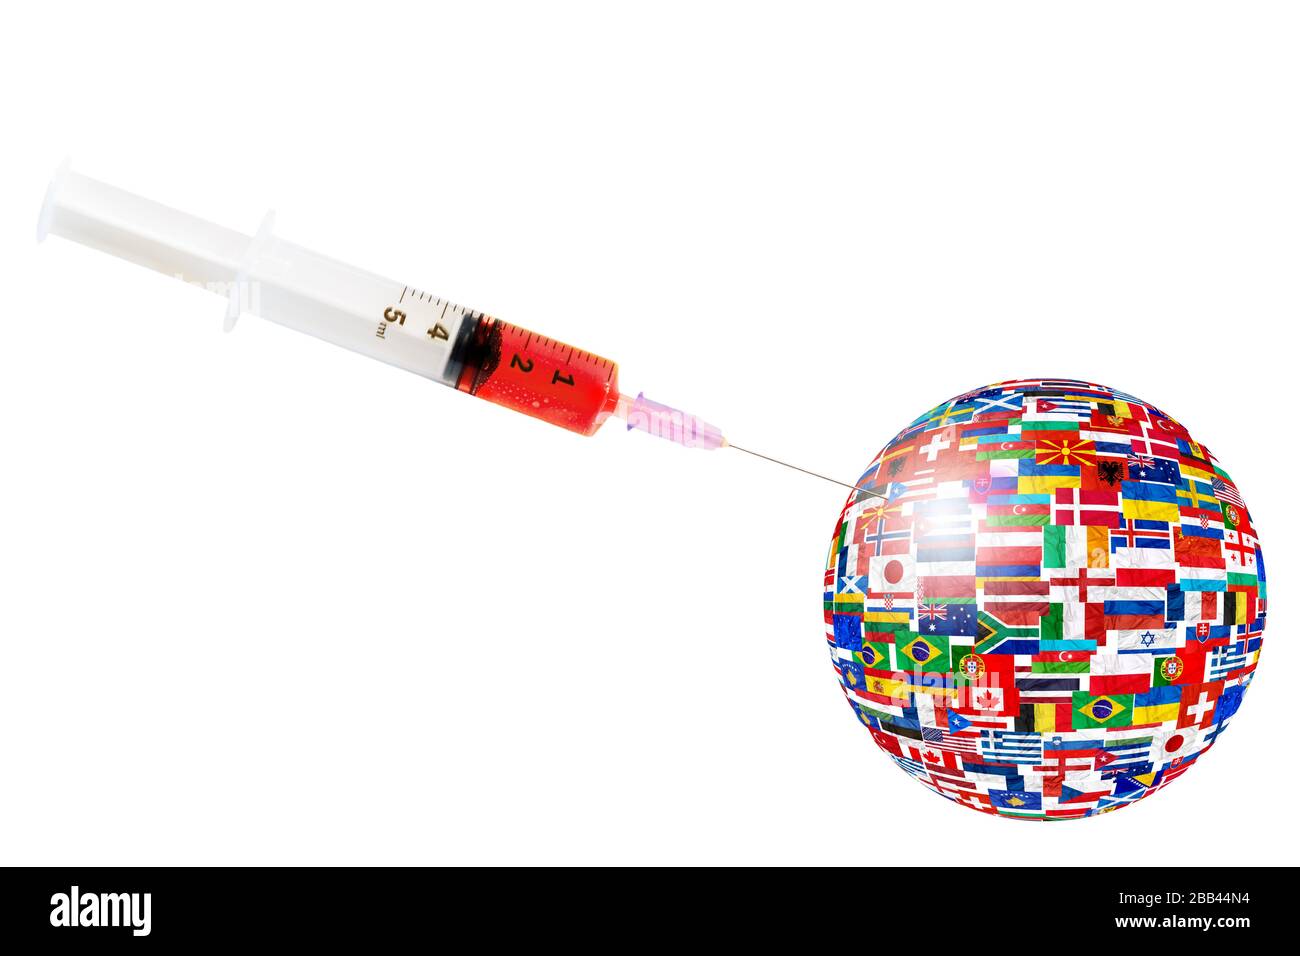 Syringe with blood: positive analysis from COVID-19 and image of world with flags of countries with Coronavirus. Covid 19-NCP virus: contagion of a Stock Photo